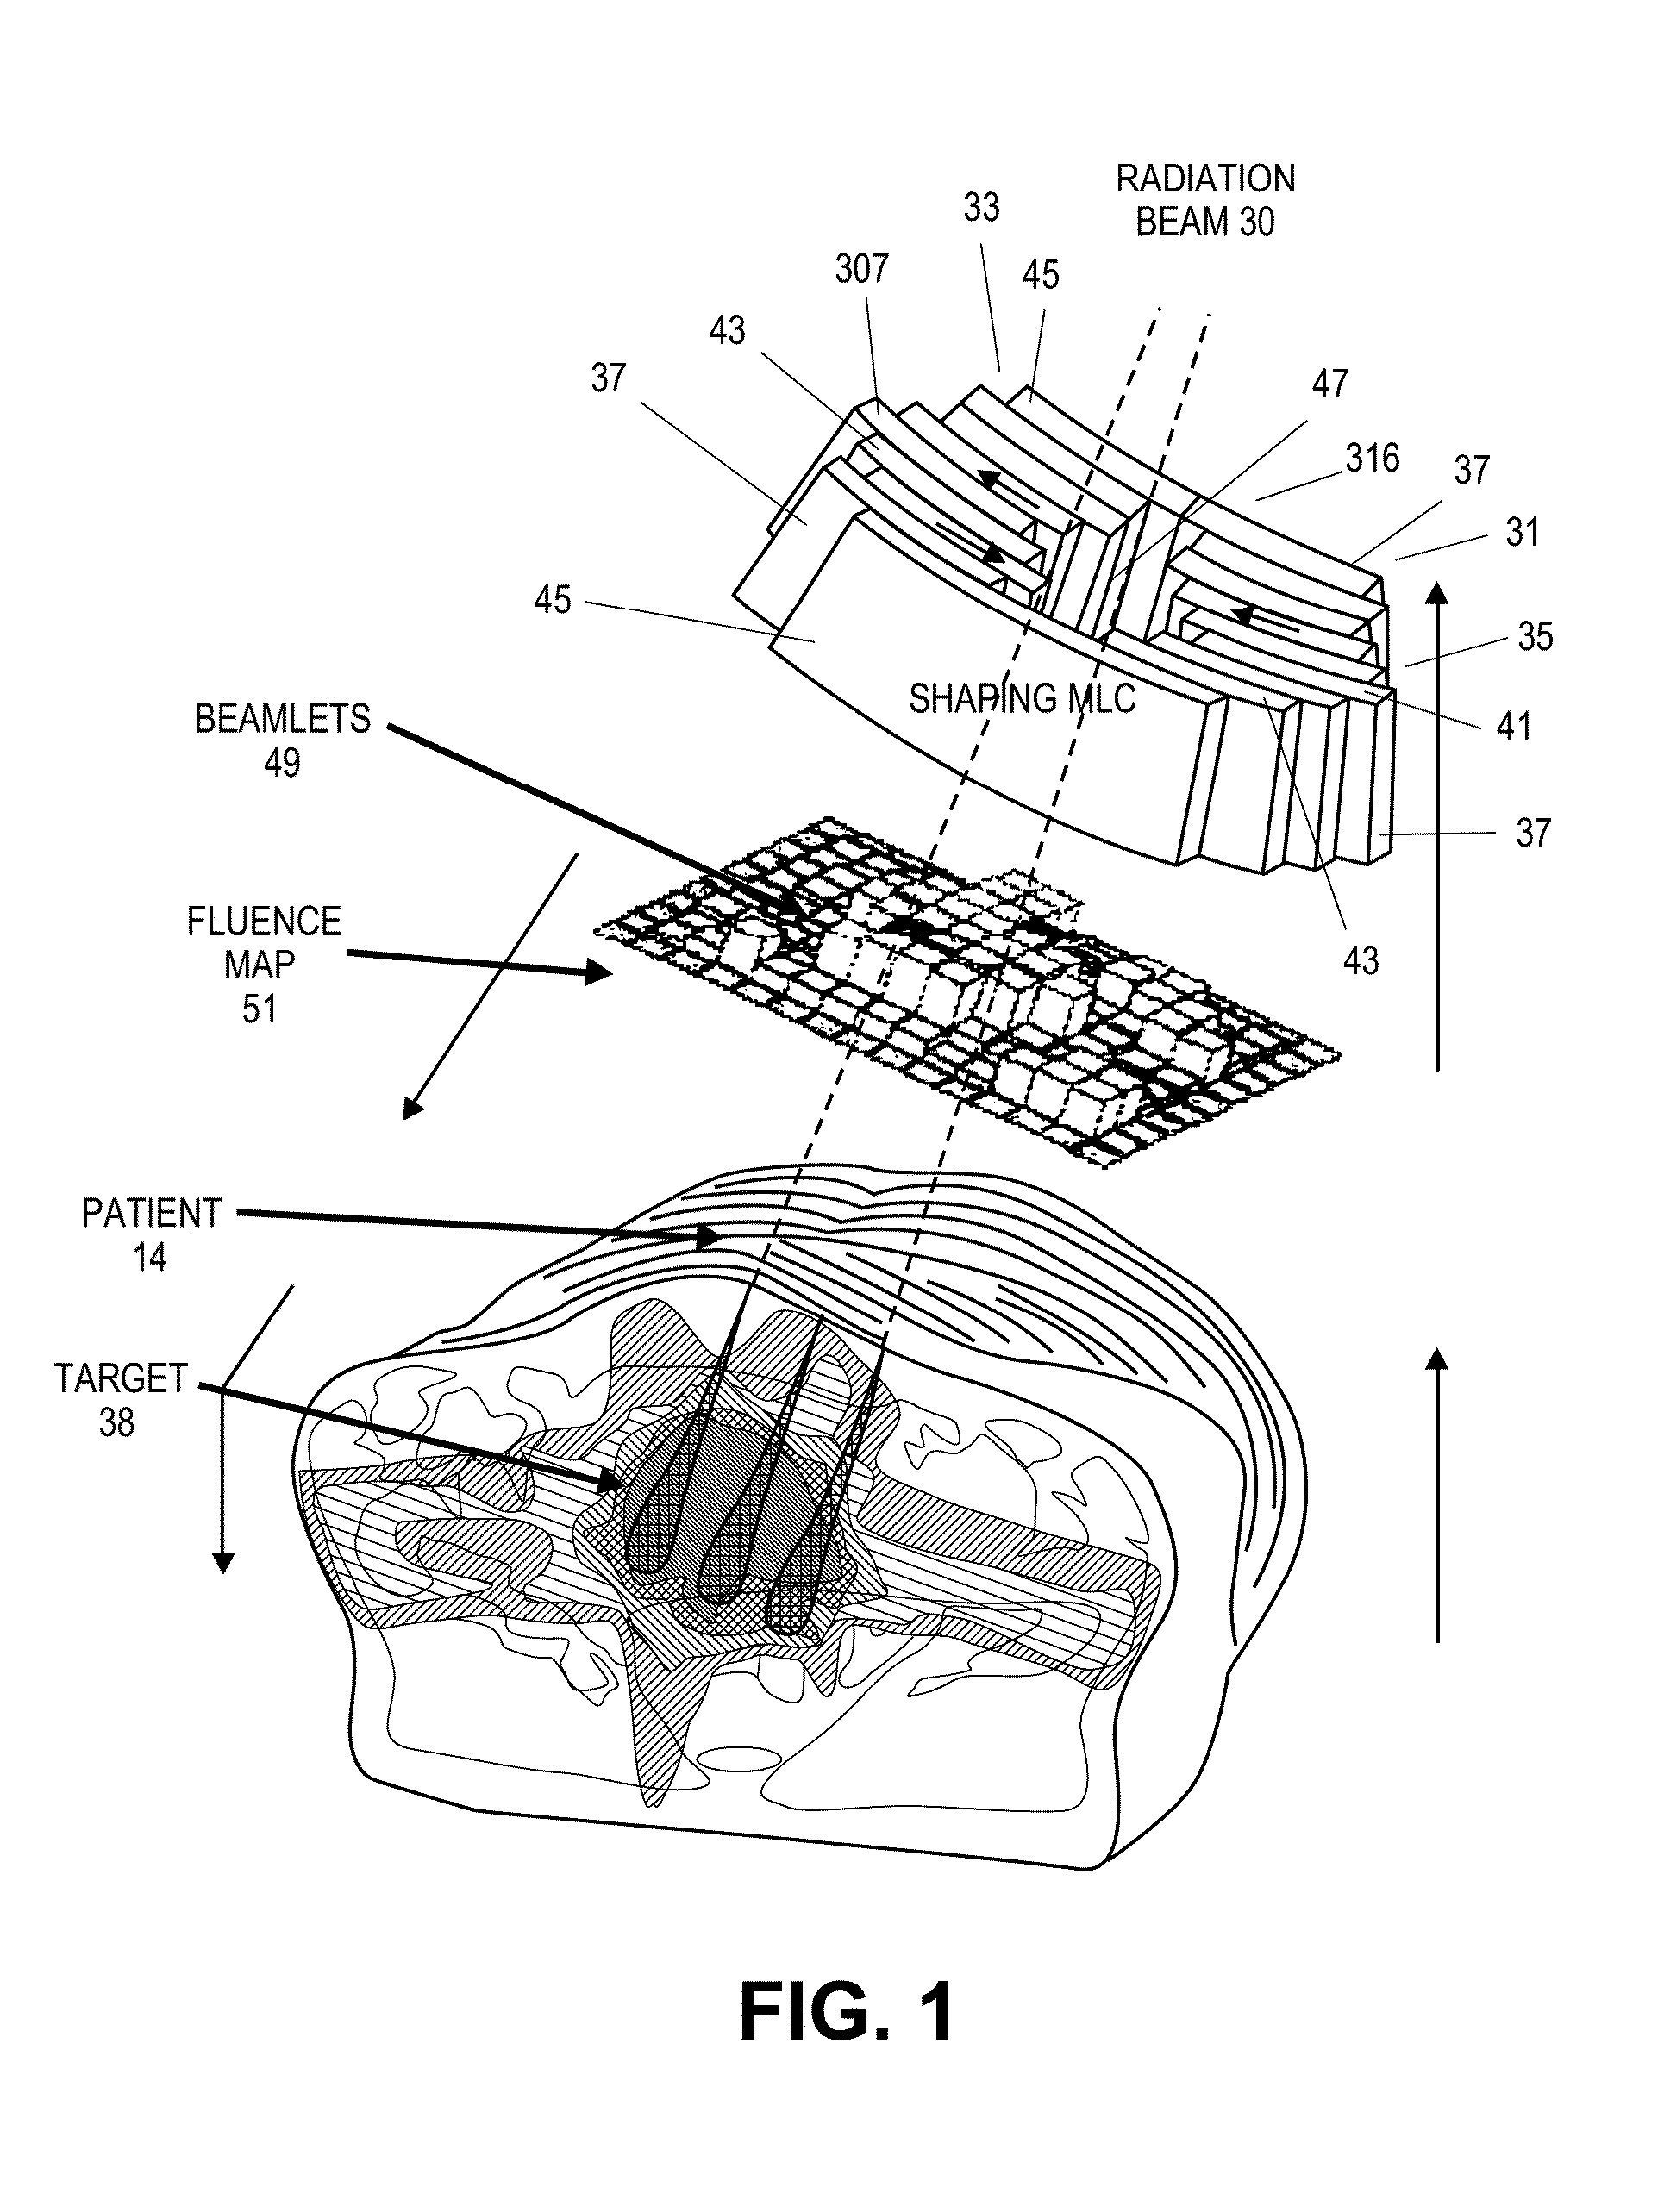 Electromagnetically actuated multi-leaf collimator